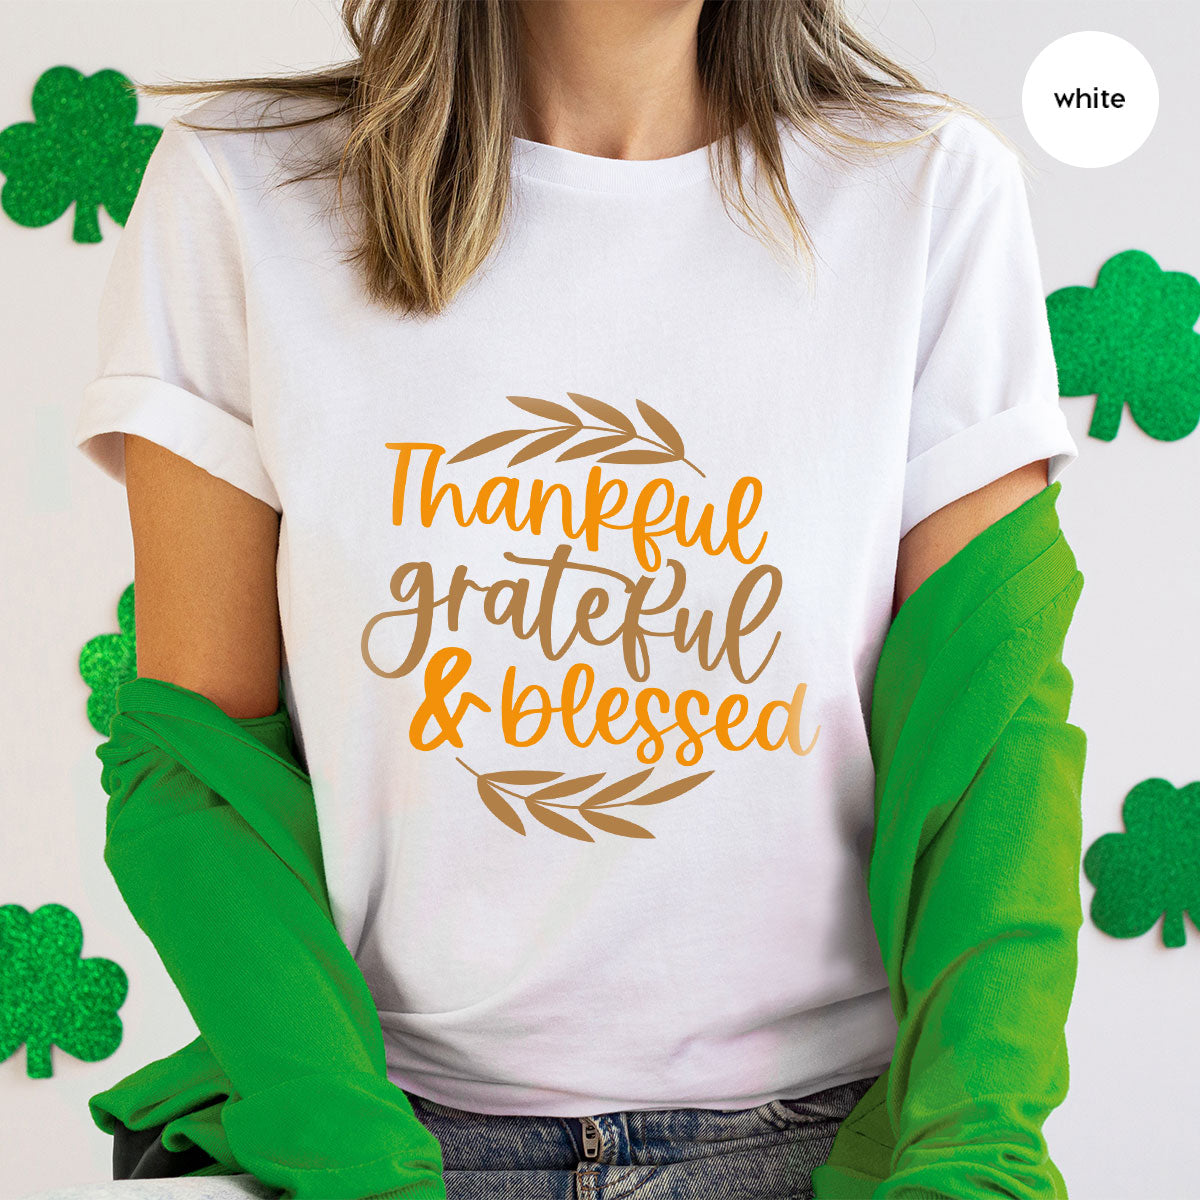 Fall Tshirt, Autumn Clothing, Gift for Her, Happy Thanksgiving Outfit, Leaves Graphic Tees, Thankful Grateful Blessed T-Shirt